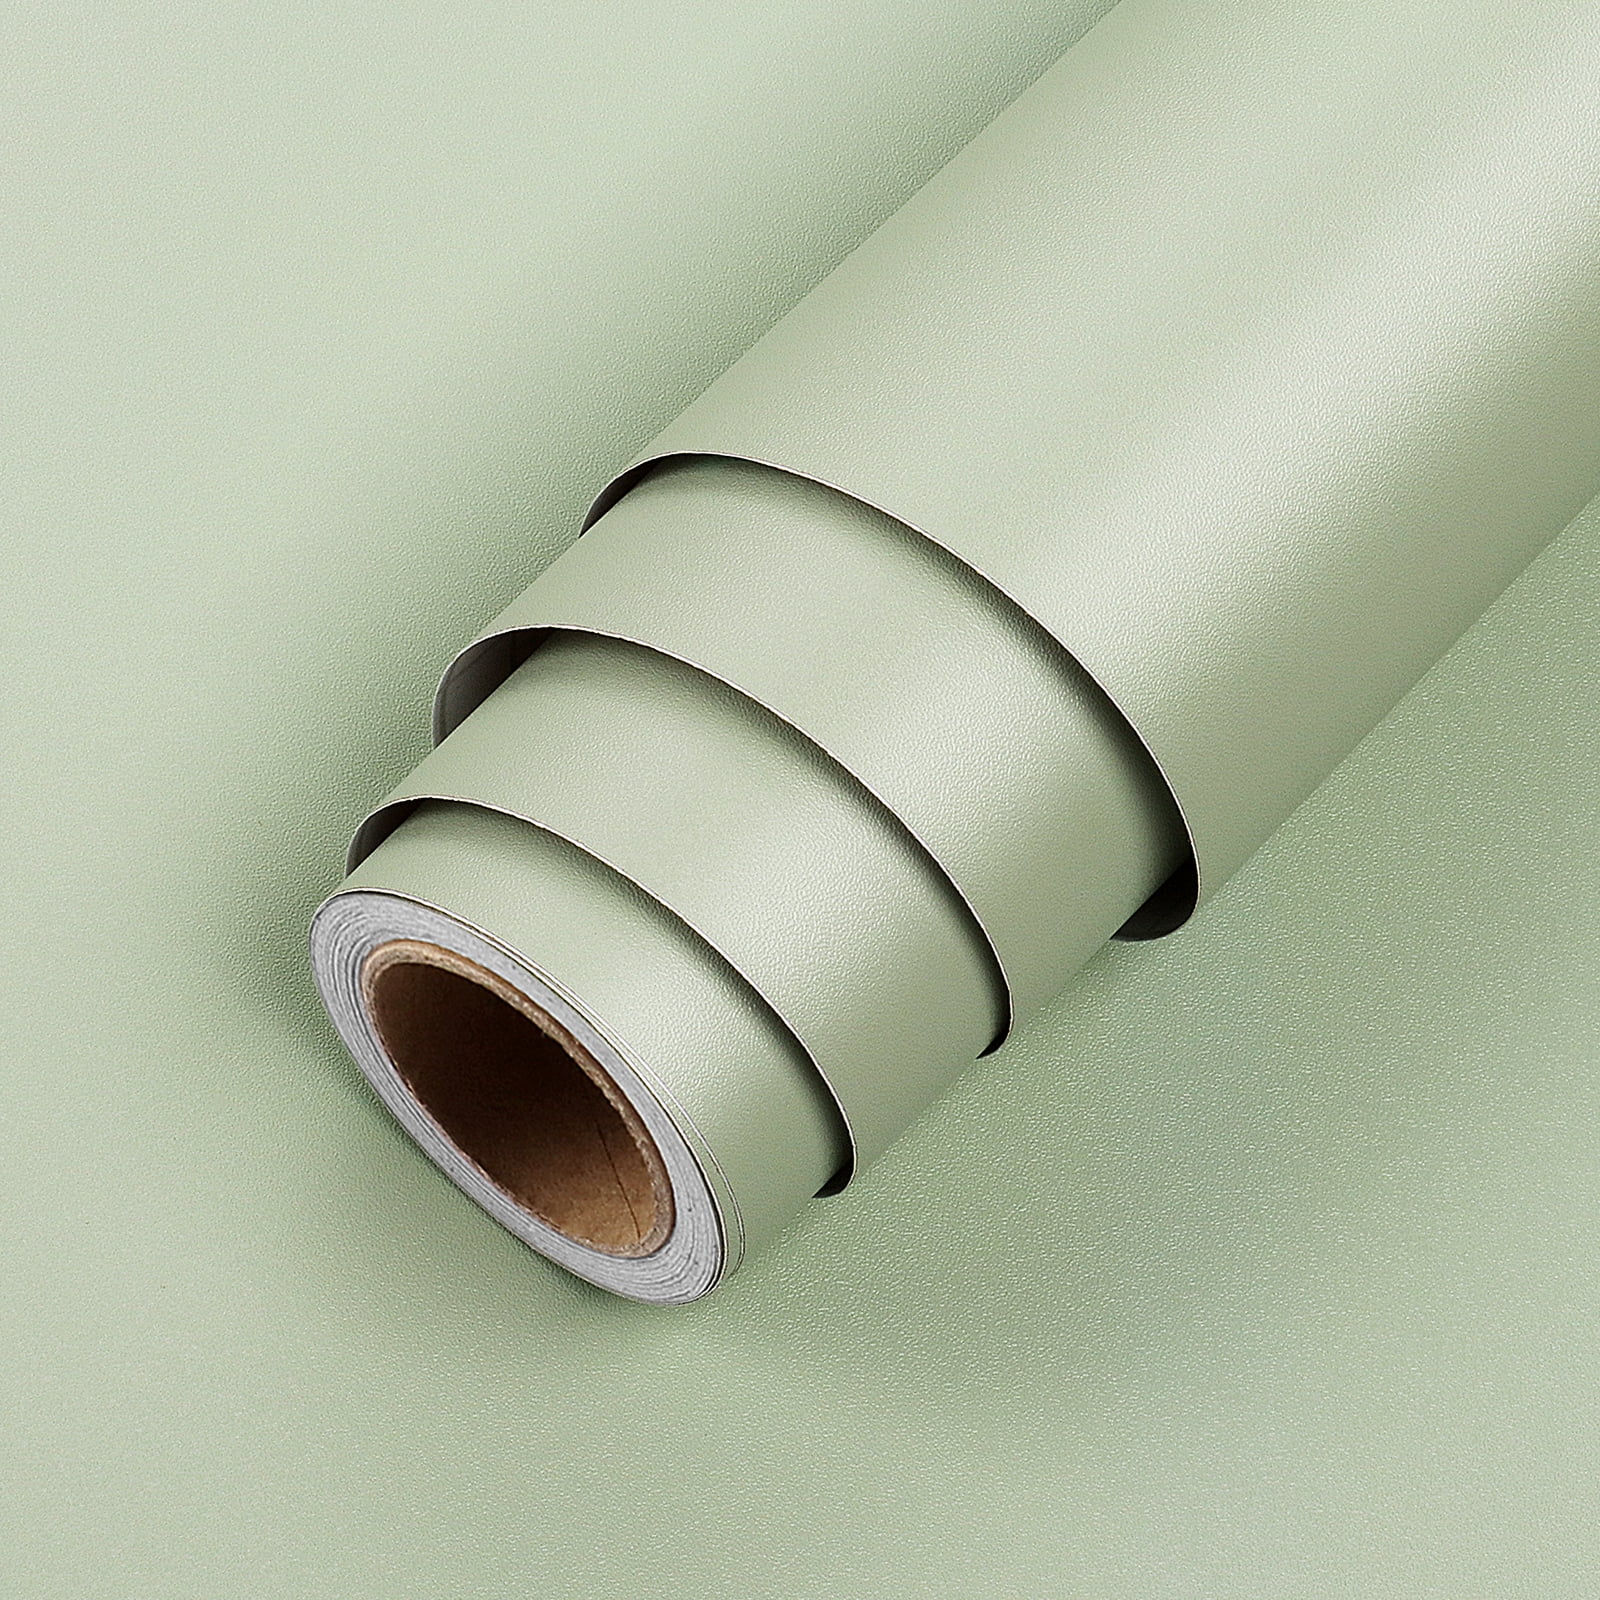 Wrapping Paper Sage Green, Eco-friendly Paper, Elegant Sage